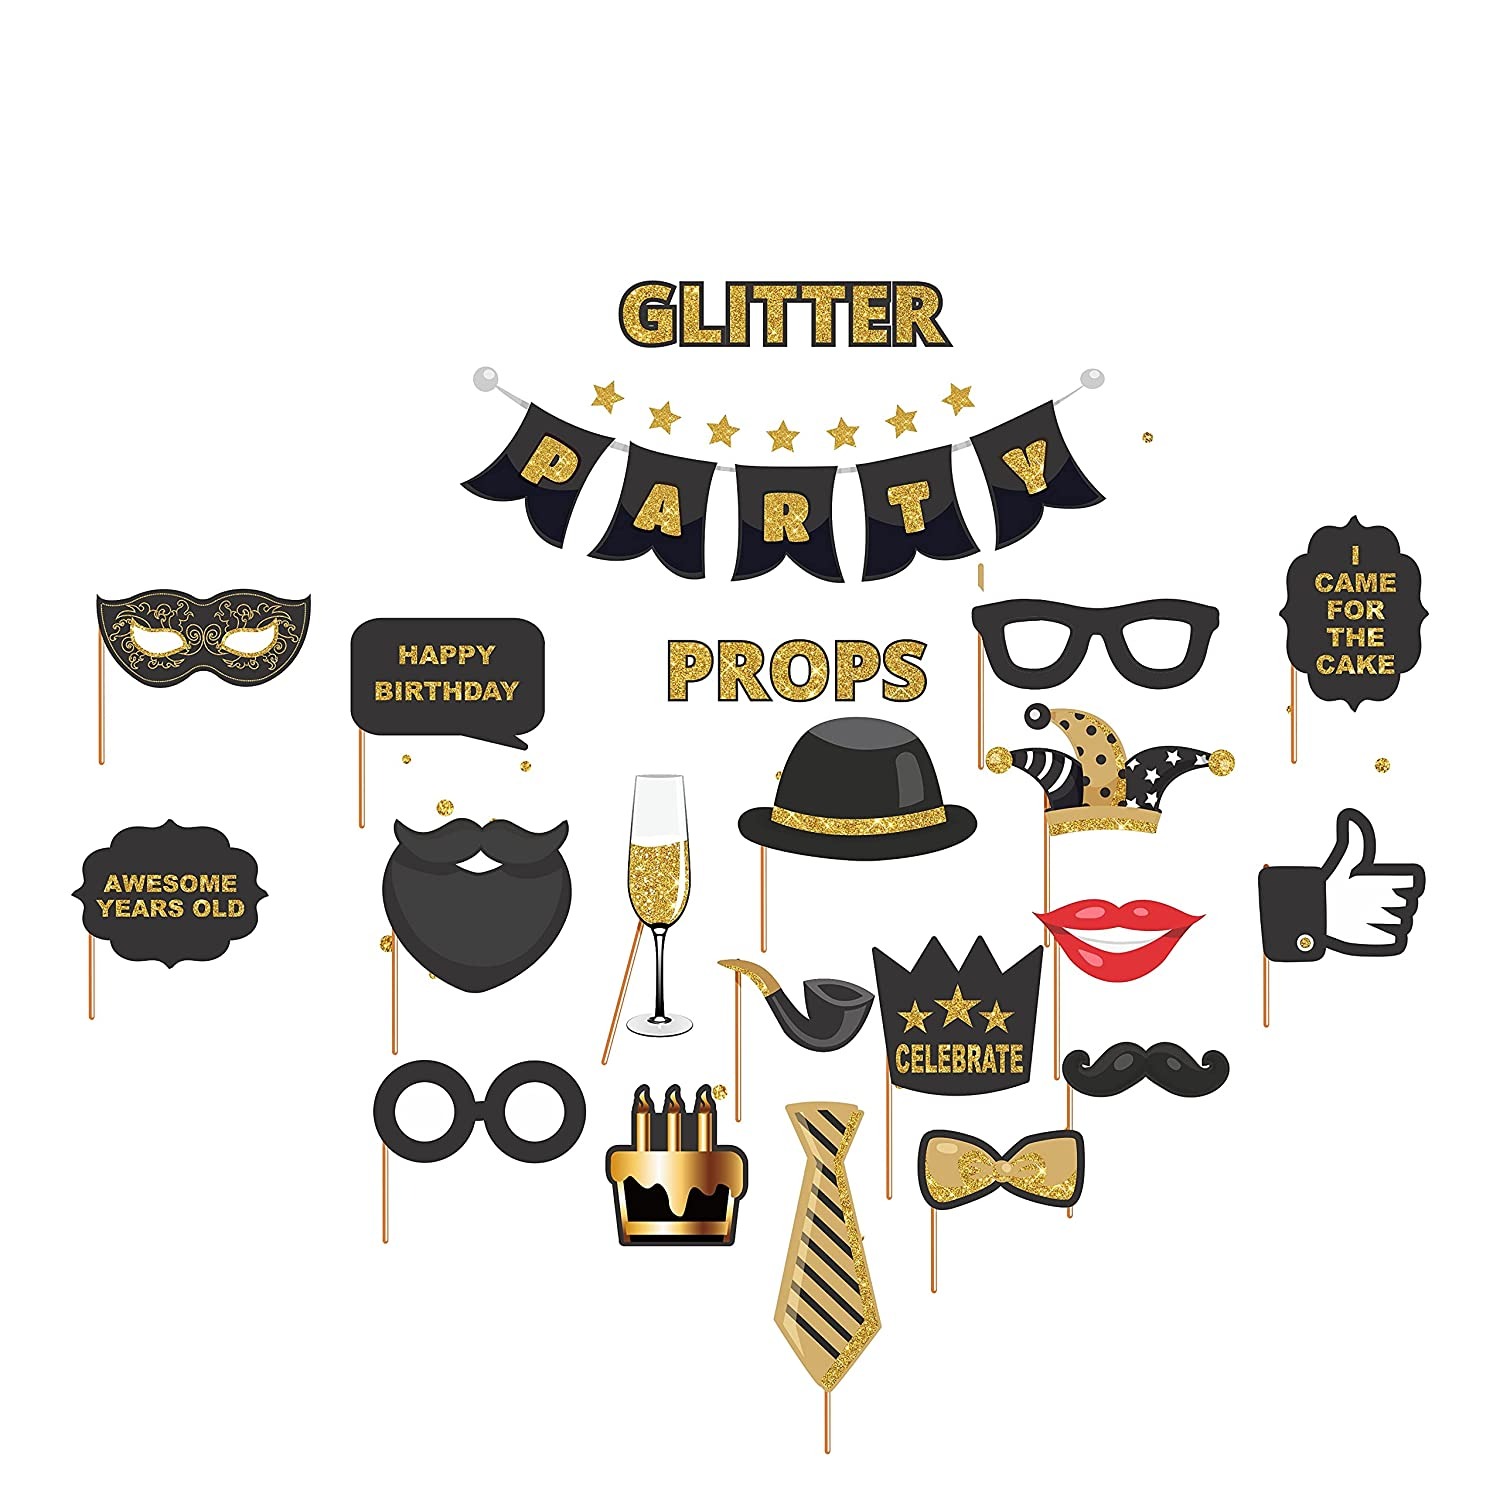 WISHKEY Glitter Party Photo Booth Props